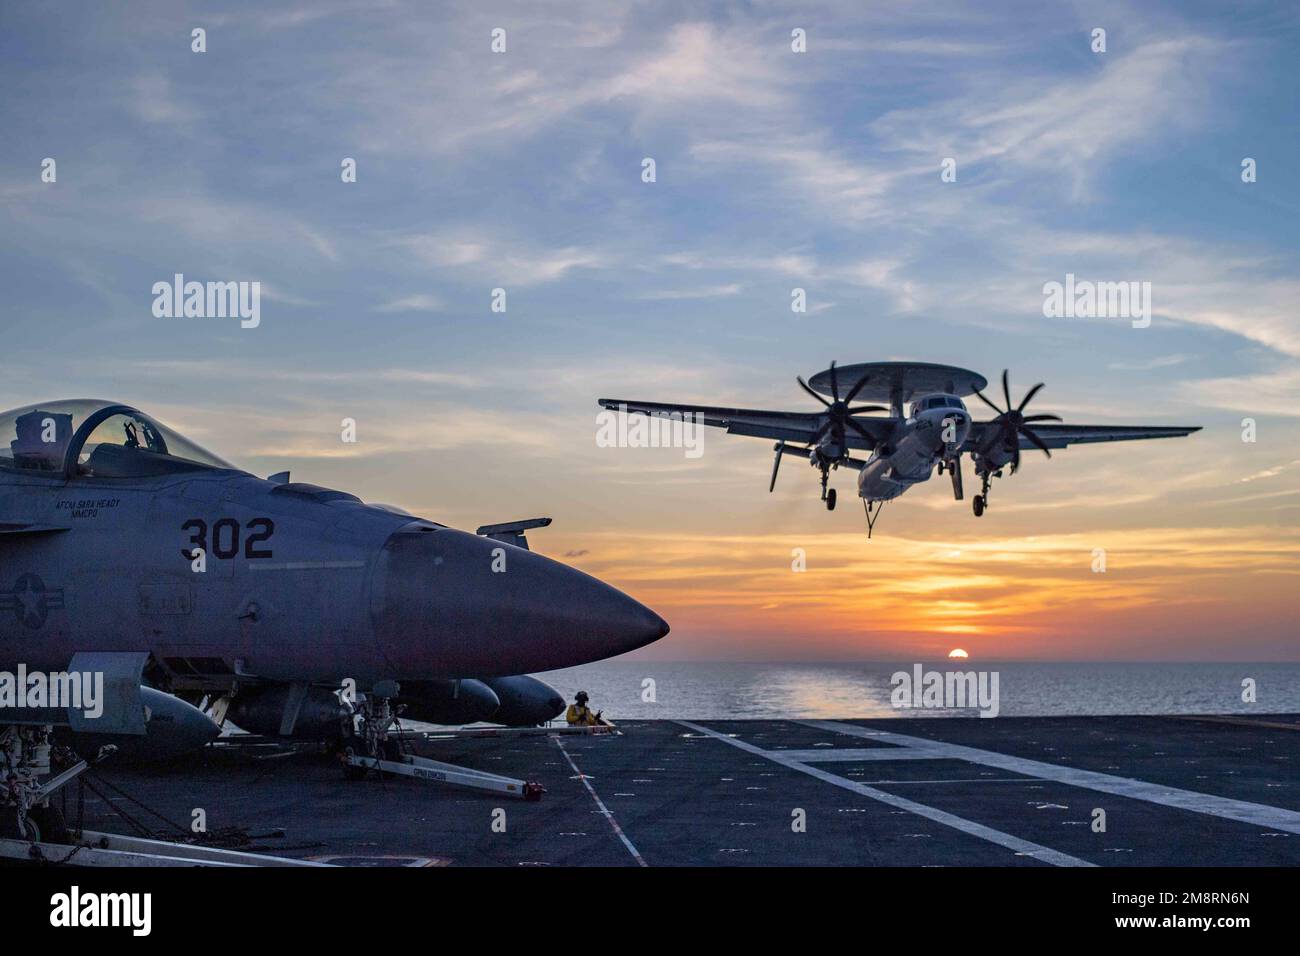 Uss Nimitz, International Waters. 13th Jan, 2023. USS Nimitz, International Waters. 13 January, 2023. A U.S. Navy E-2C Hawkeye early warning aircraft from the Sun Kings of Carrier Airborne Early Warning Squadron 116, approaches to land on the flight deck of the Nimitz-class aircraft carrier USS Nimitz at sunset underway conducting routine operations, January 13, 2023 in the South China Sea. Credit: MC2 David Rowe/U.S Navy Photo/Alamy Live News Stock Photo